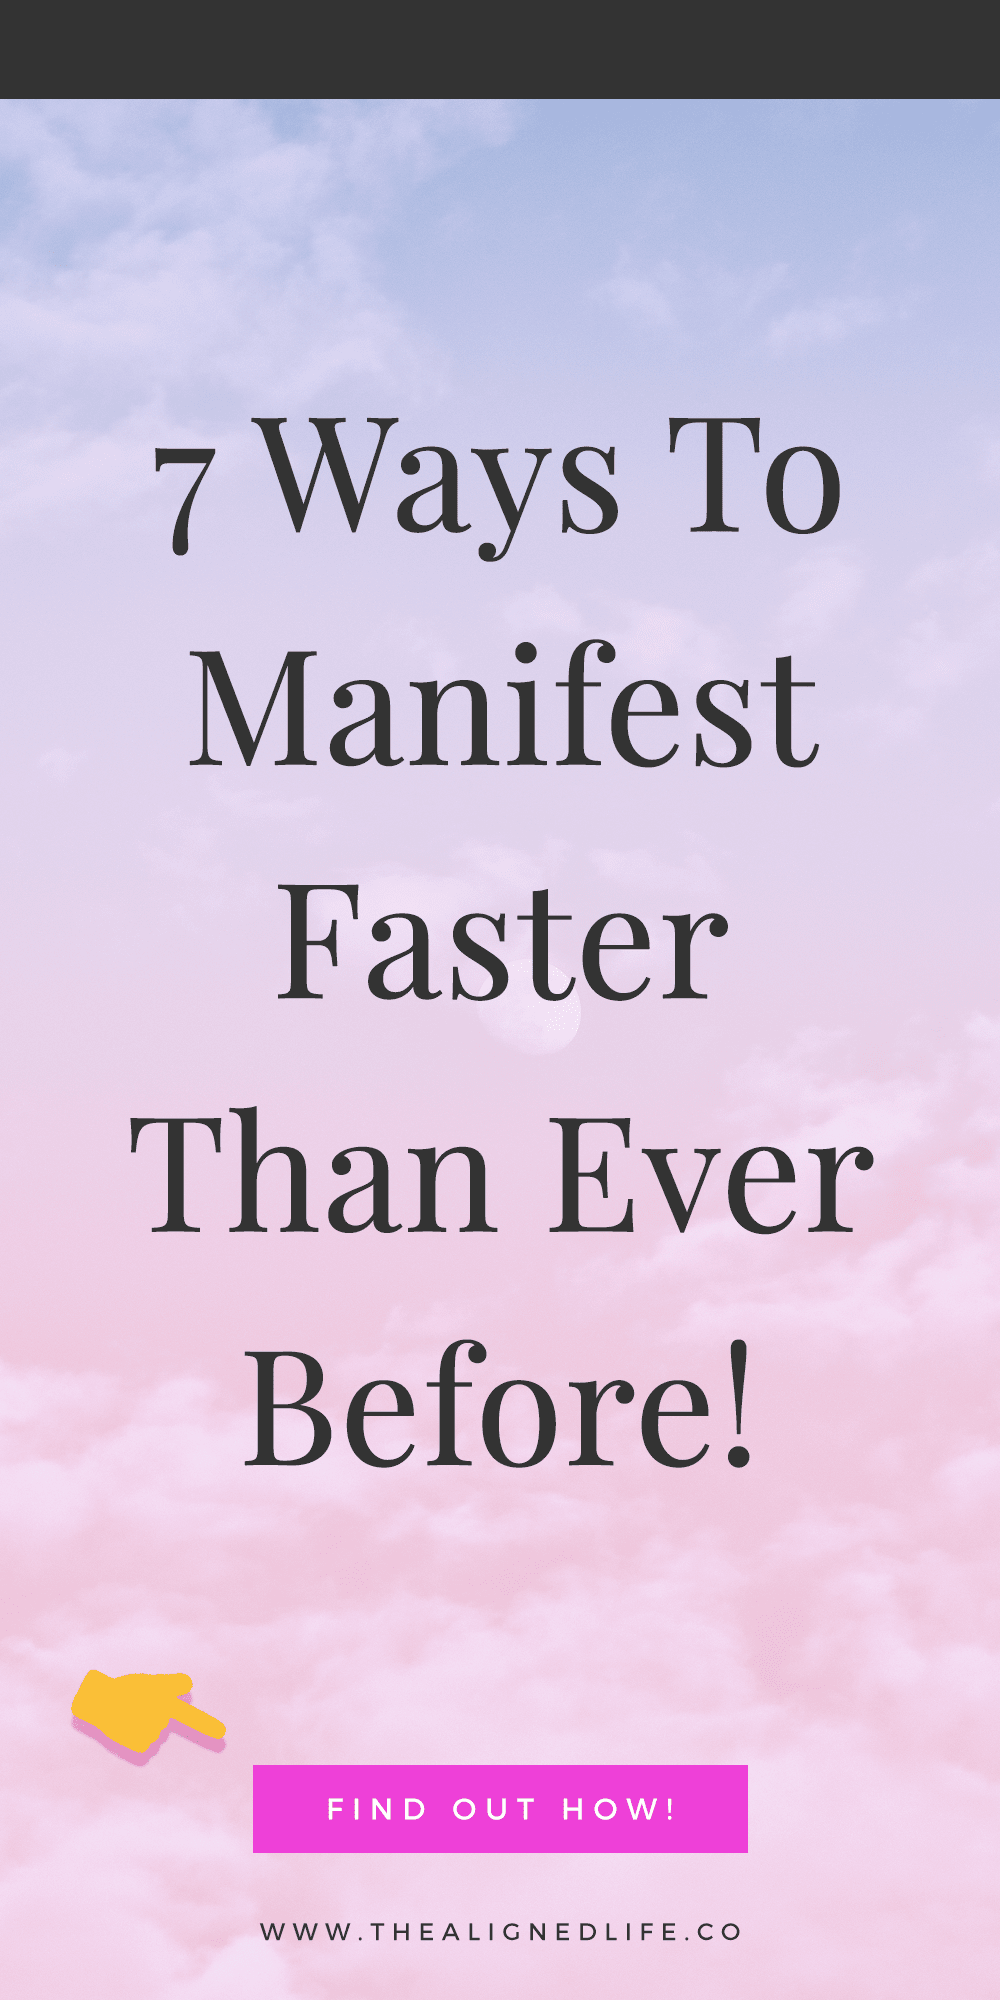 7 Ways To Manifest Faster Than Ever Before